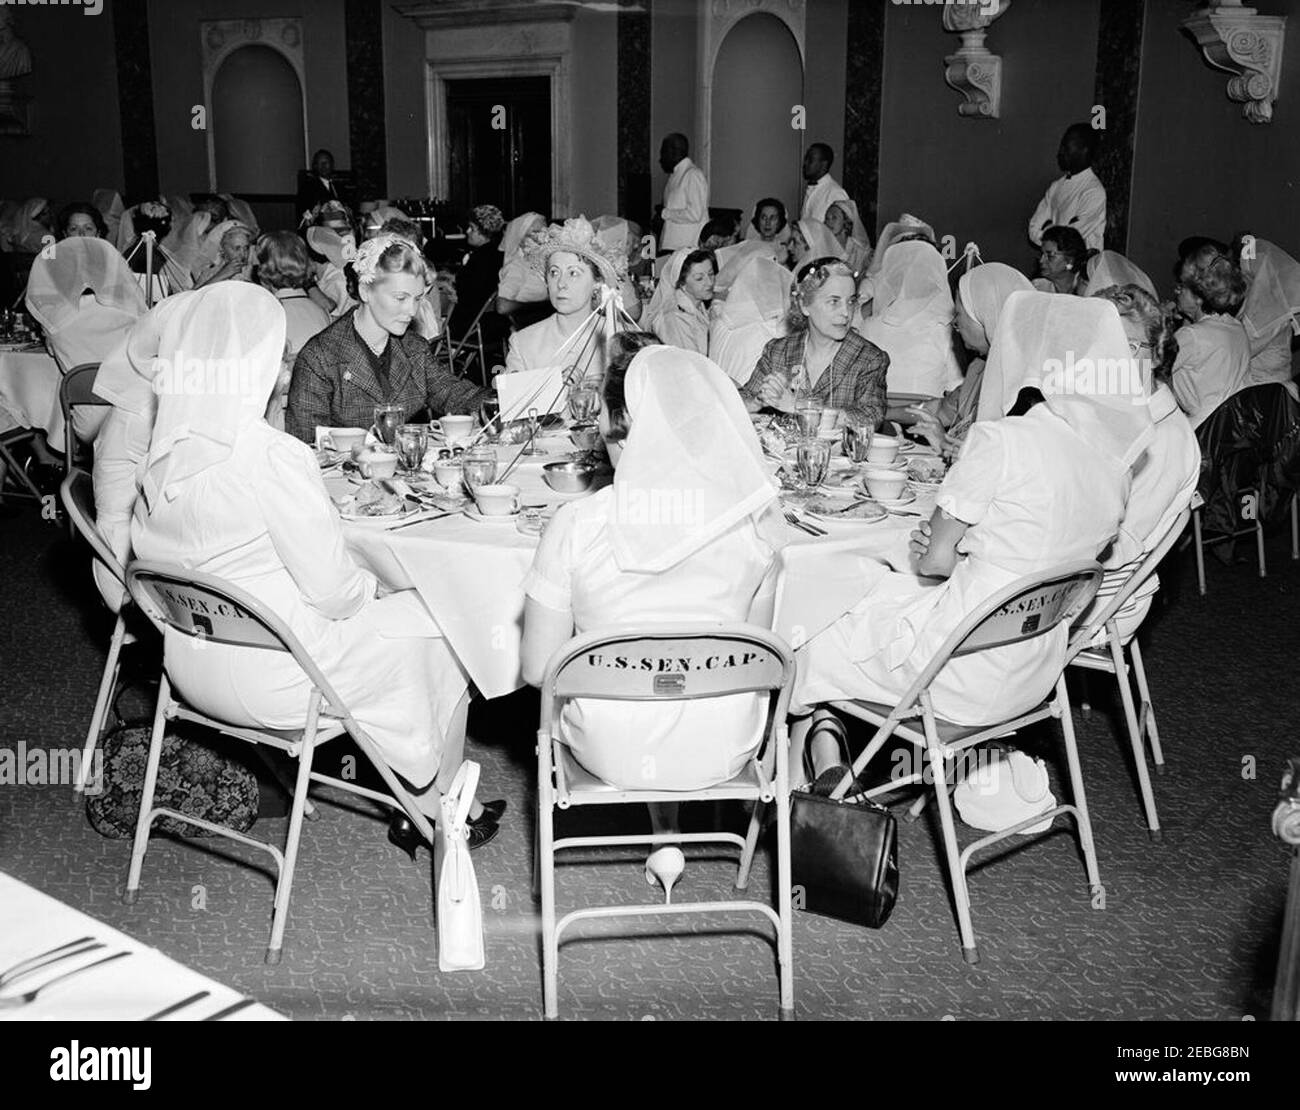 First Lady Jacqueline Kennedy (JBK) attends the Senate Ladiesu0027 Red Cross Unit Luncheon. Members of the Senate Ladies Red Cross Unit sit at a table during a luncheon (attended by First Lady Jacqueline Kennedy) in the Old Supreme Court Chamber, United States Capitol Building, Washington, D.C. The Red Cross unit (also known as u201cLadies of the Senateu201d) is comprised of the wives of members of the US Senate. Those seated at table in foreground include: Baroness Rosemary Silvercruys, former of wife Senator Brien McMahon (Connecticut); Estelle Cadorette McGrath, wife of former Senator J. Stock Photo